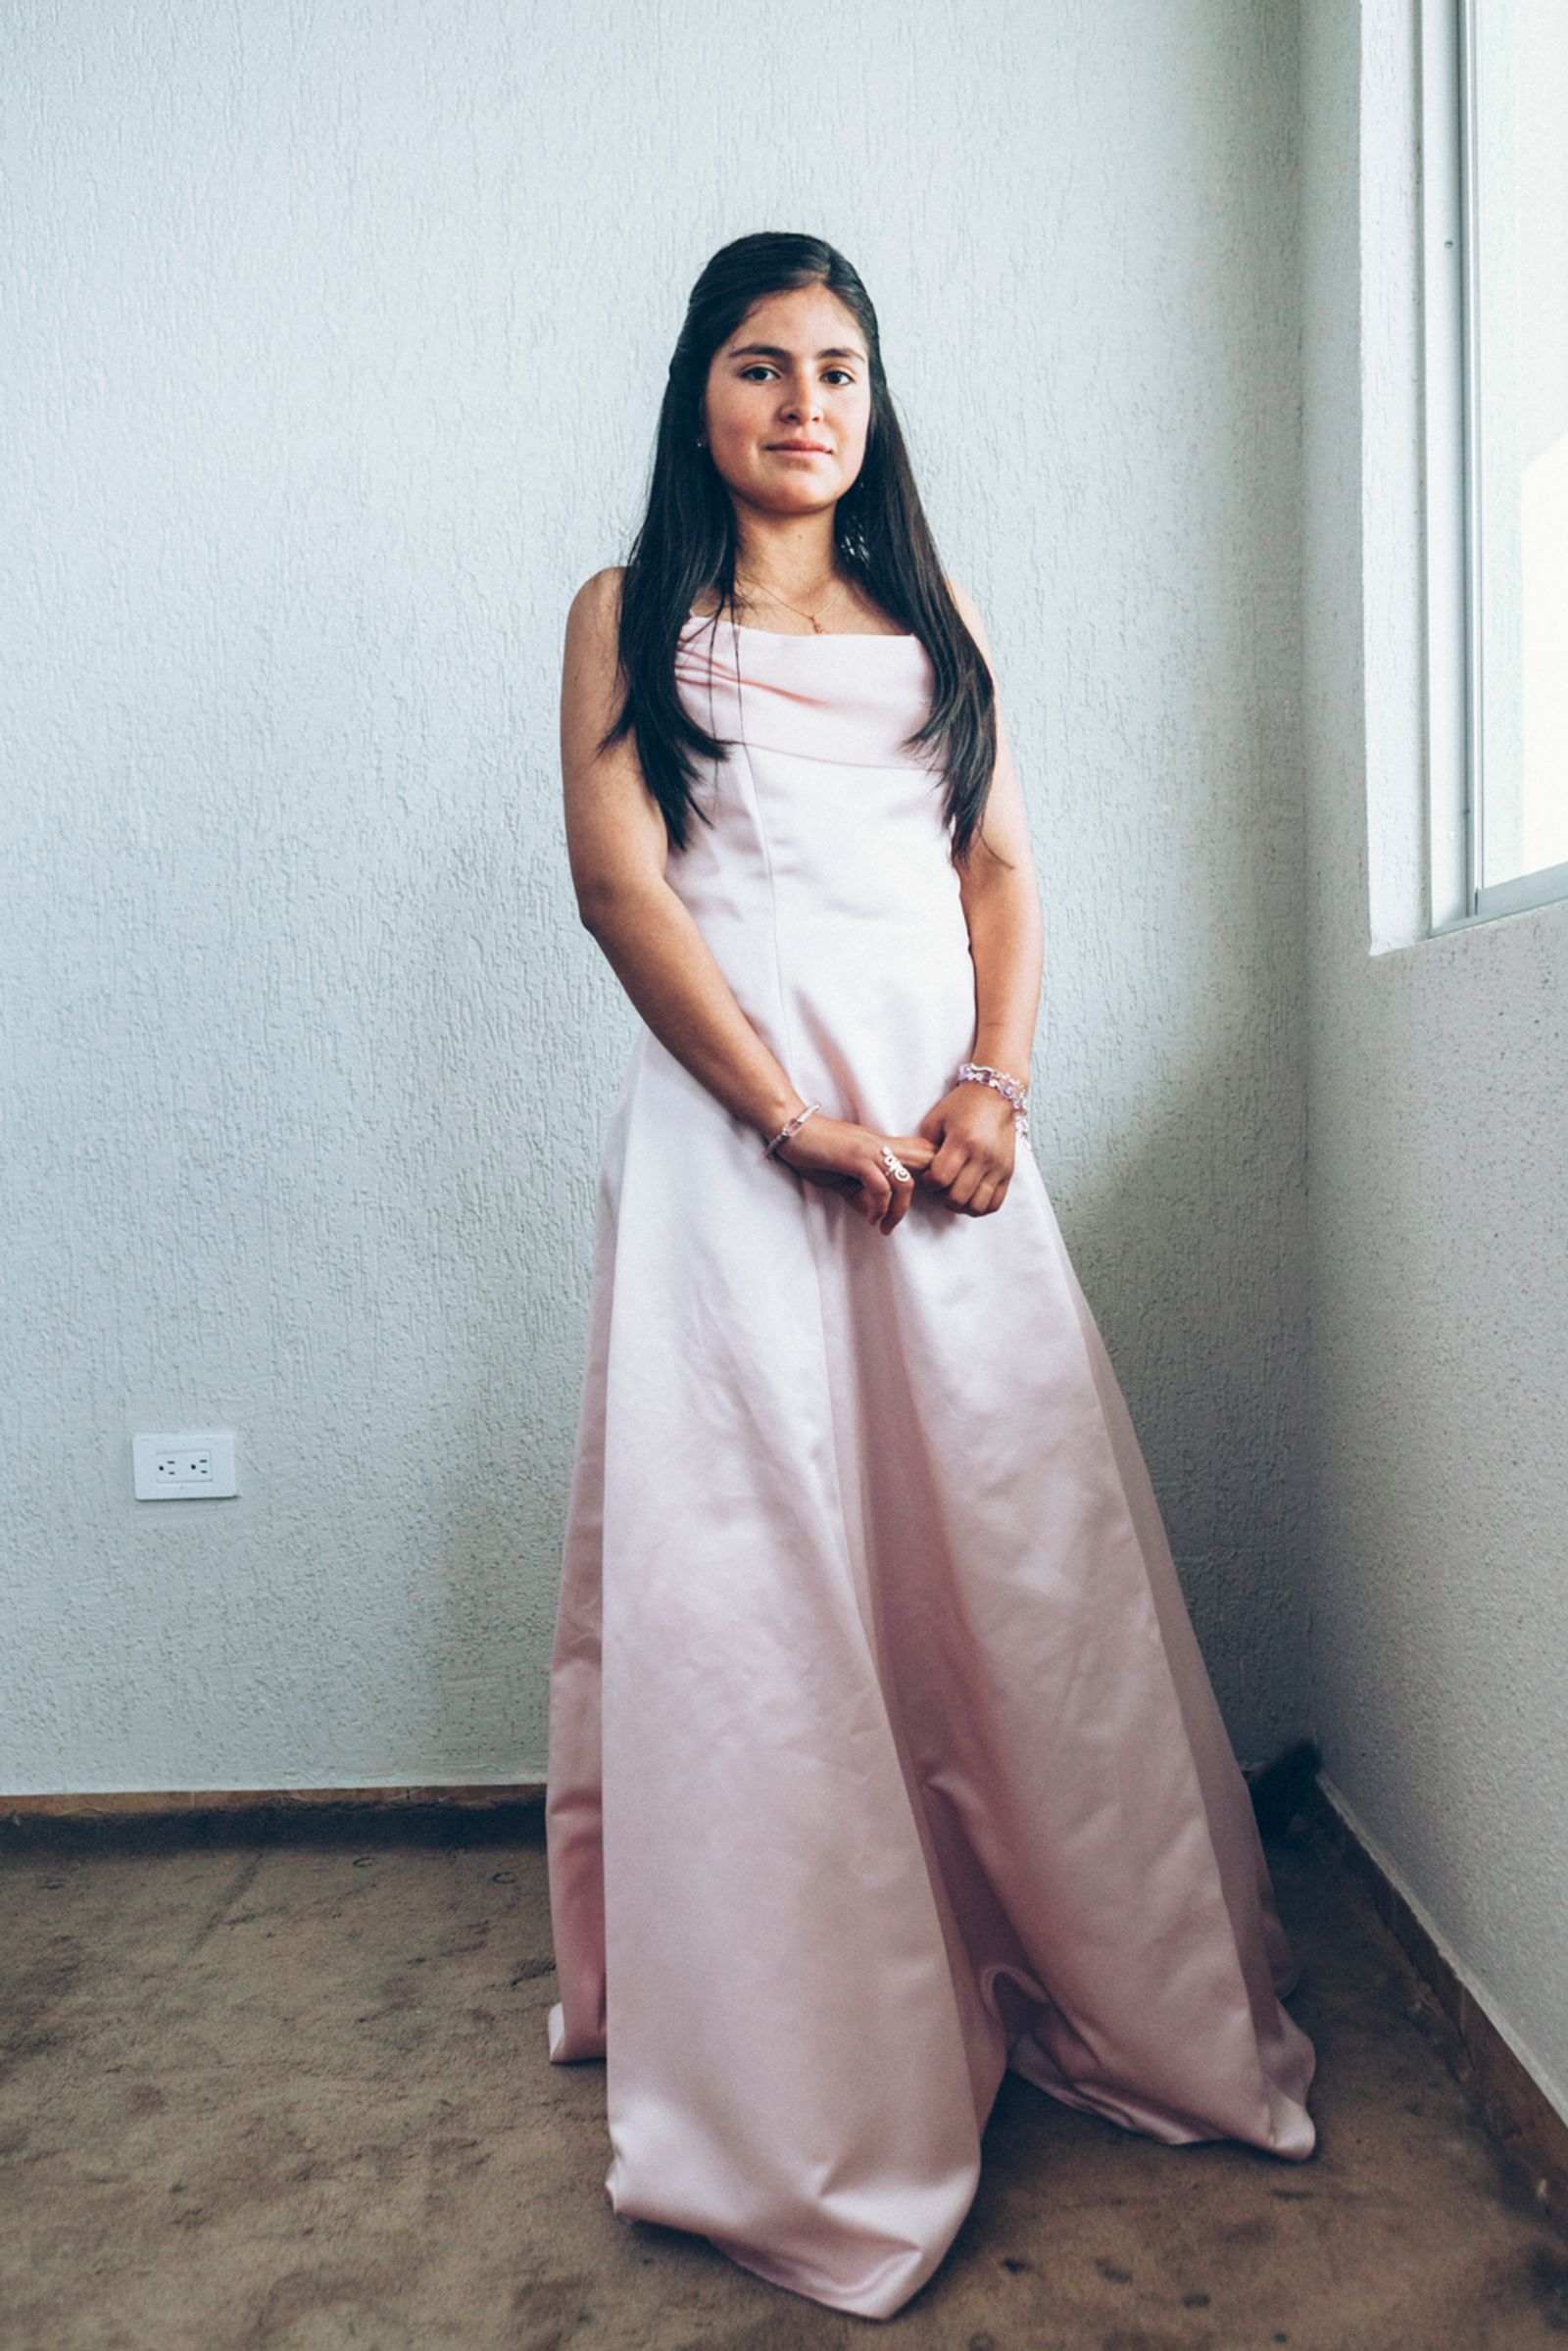 © Catalina Kulczar-Marin - Image from the Quinceañeras photography project